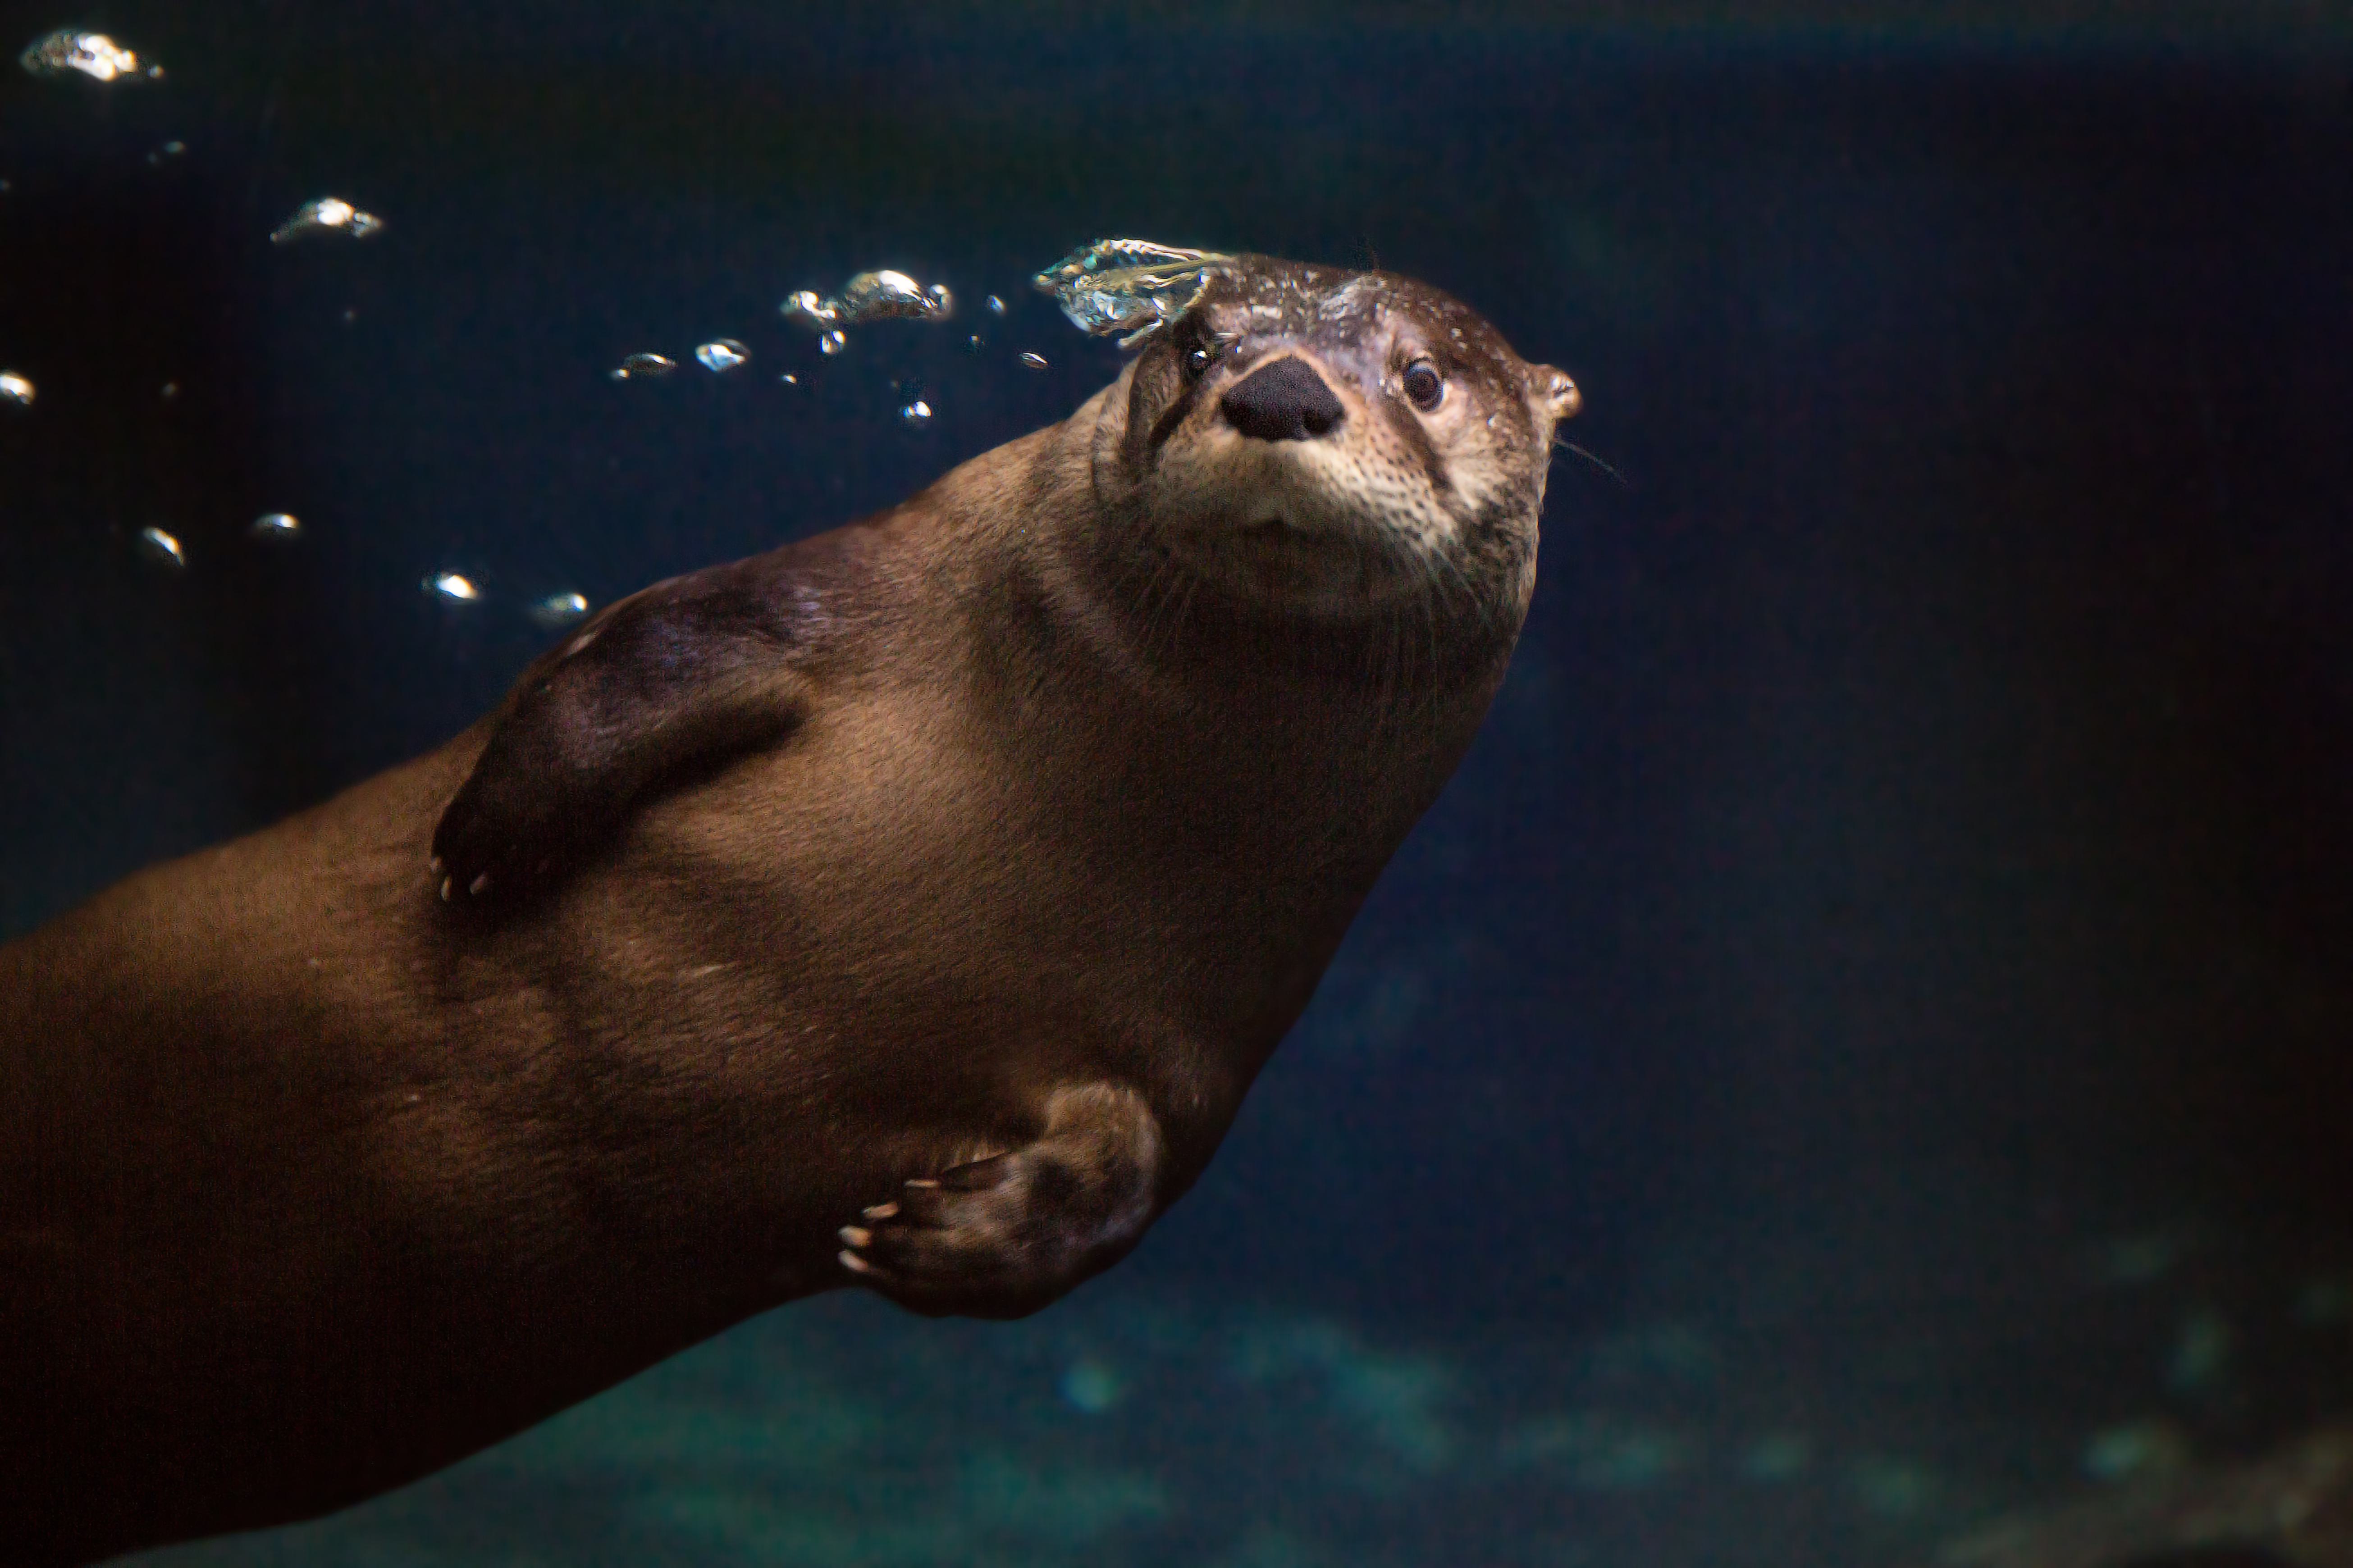 Image of a North American river otter swimming